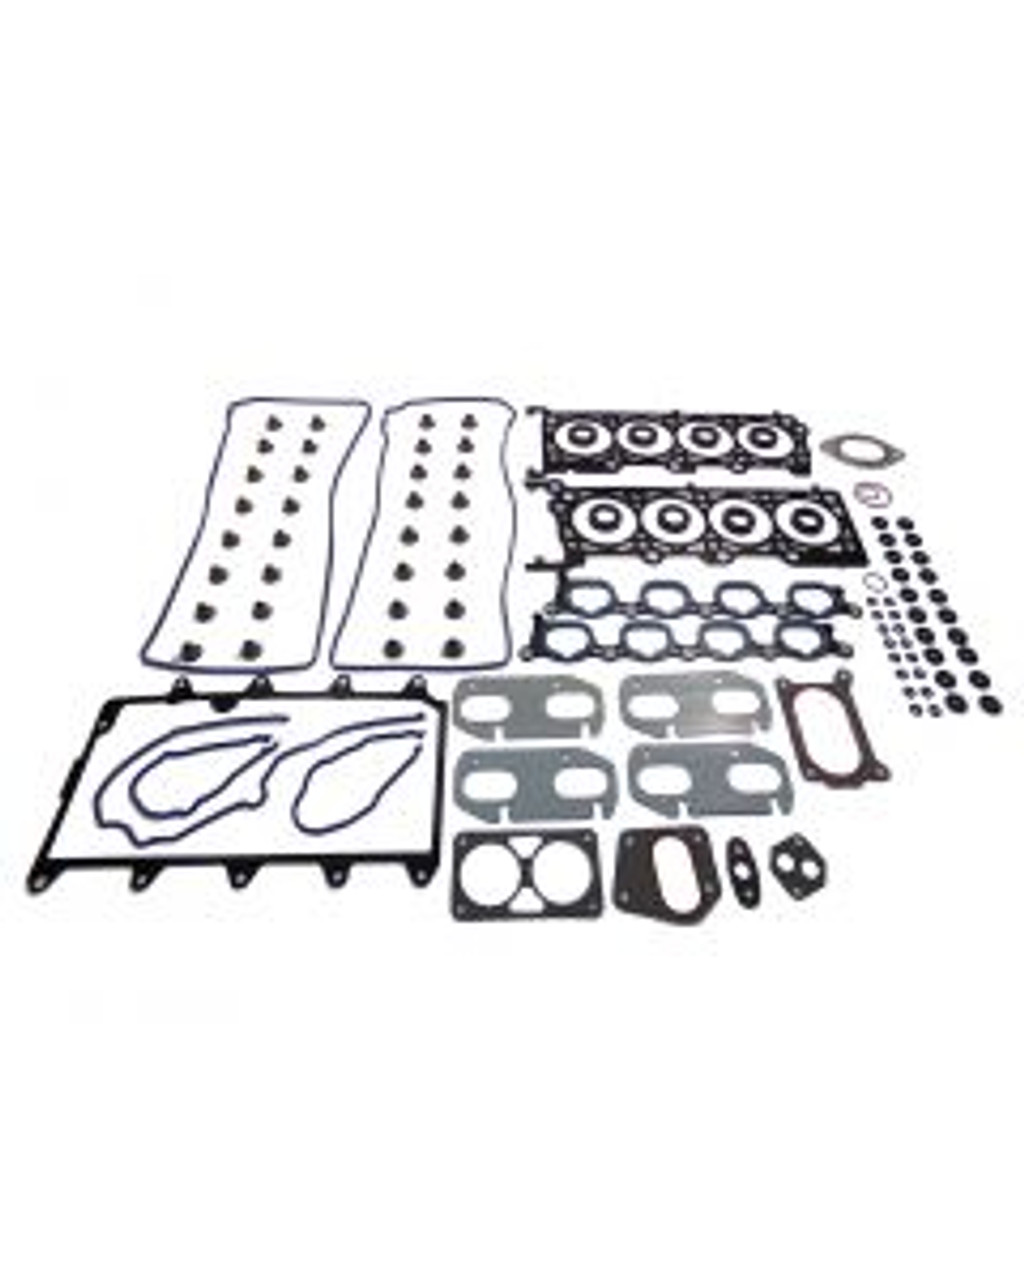 Head Gasket Set 4.6L 2004 Ford Mustang - HGS4135.2